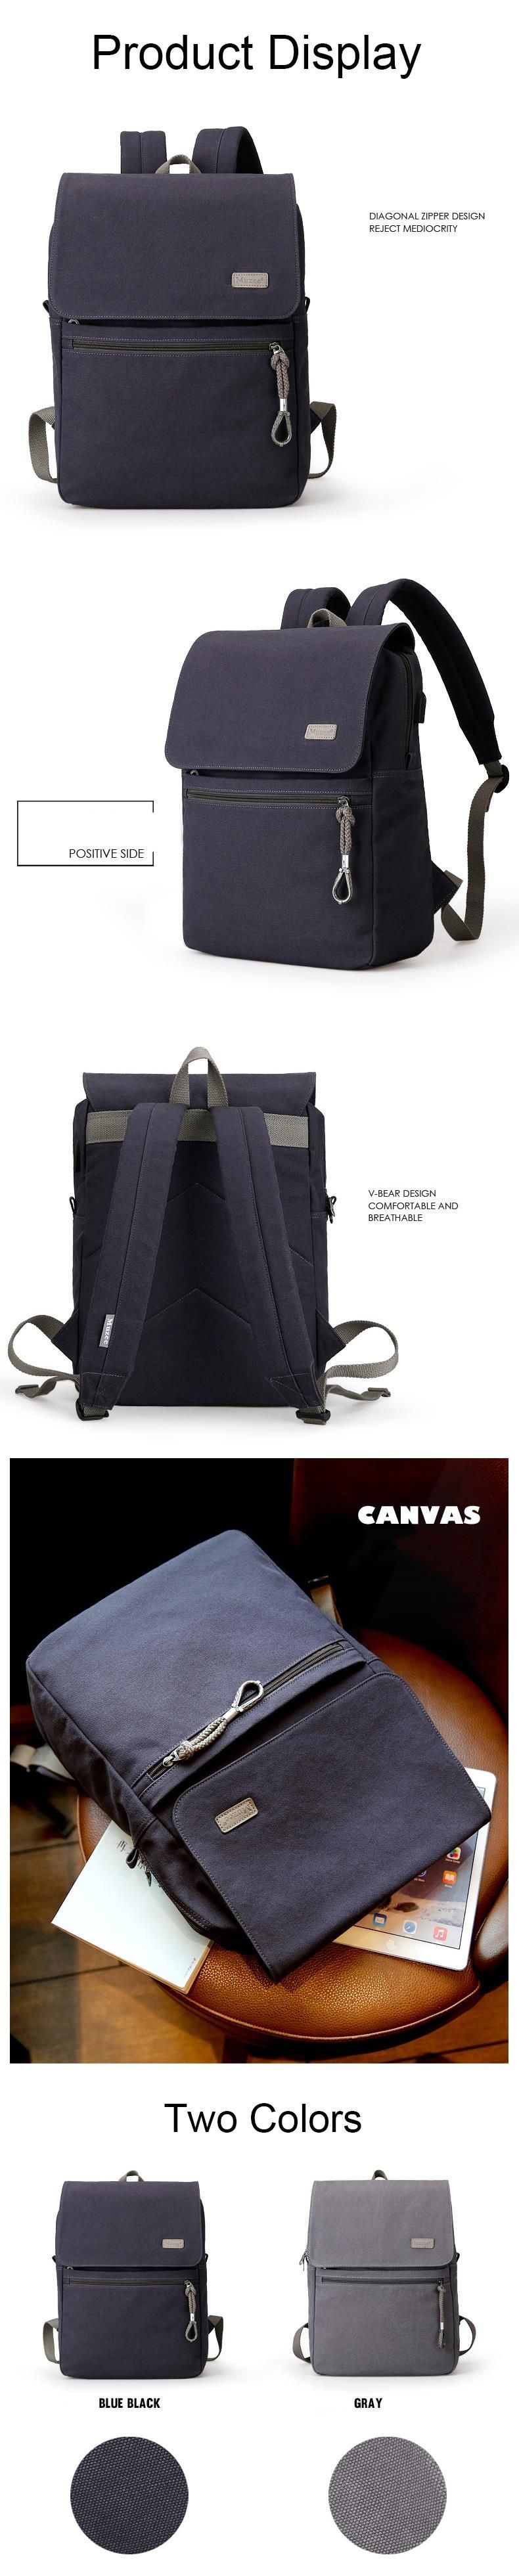 MUZEE-156-inch-USB-Chargering-Backpack-20-35L-Large-Capacity-Simple-Causal-Waterproof-Fashion-Canvas-1646158